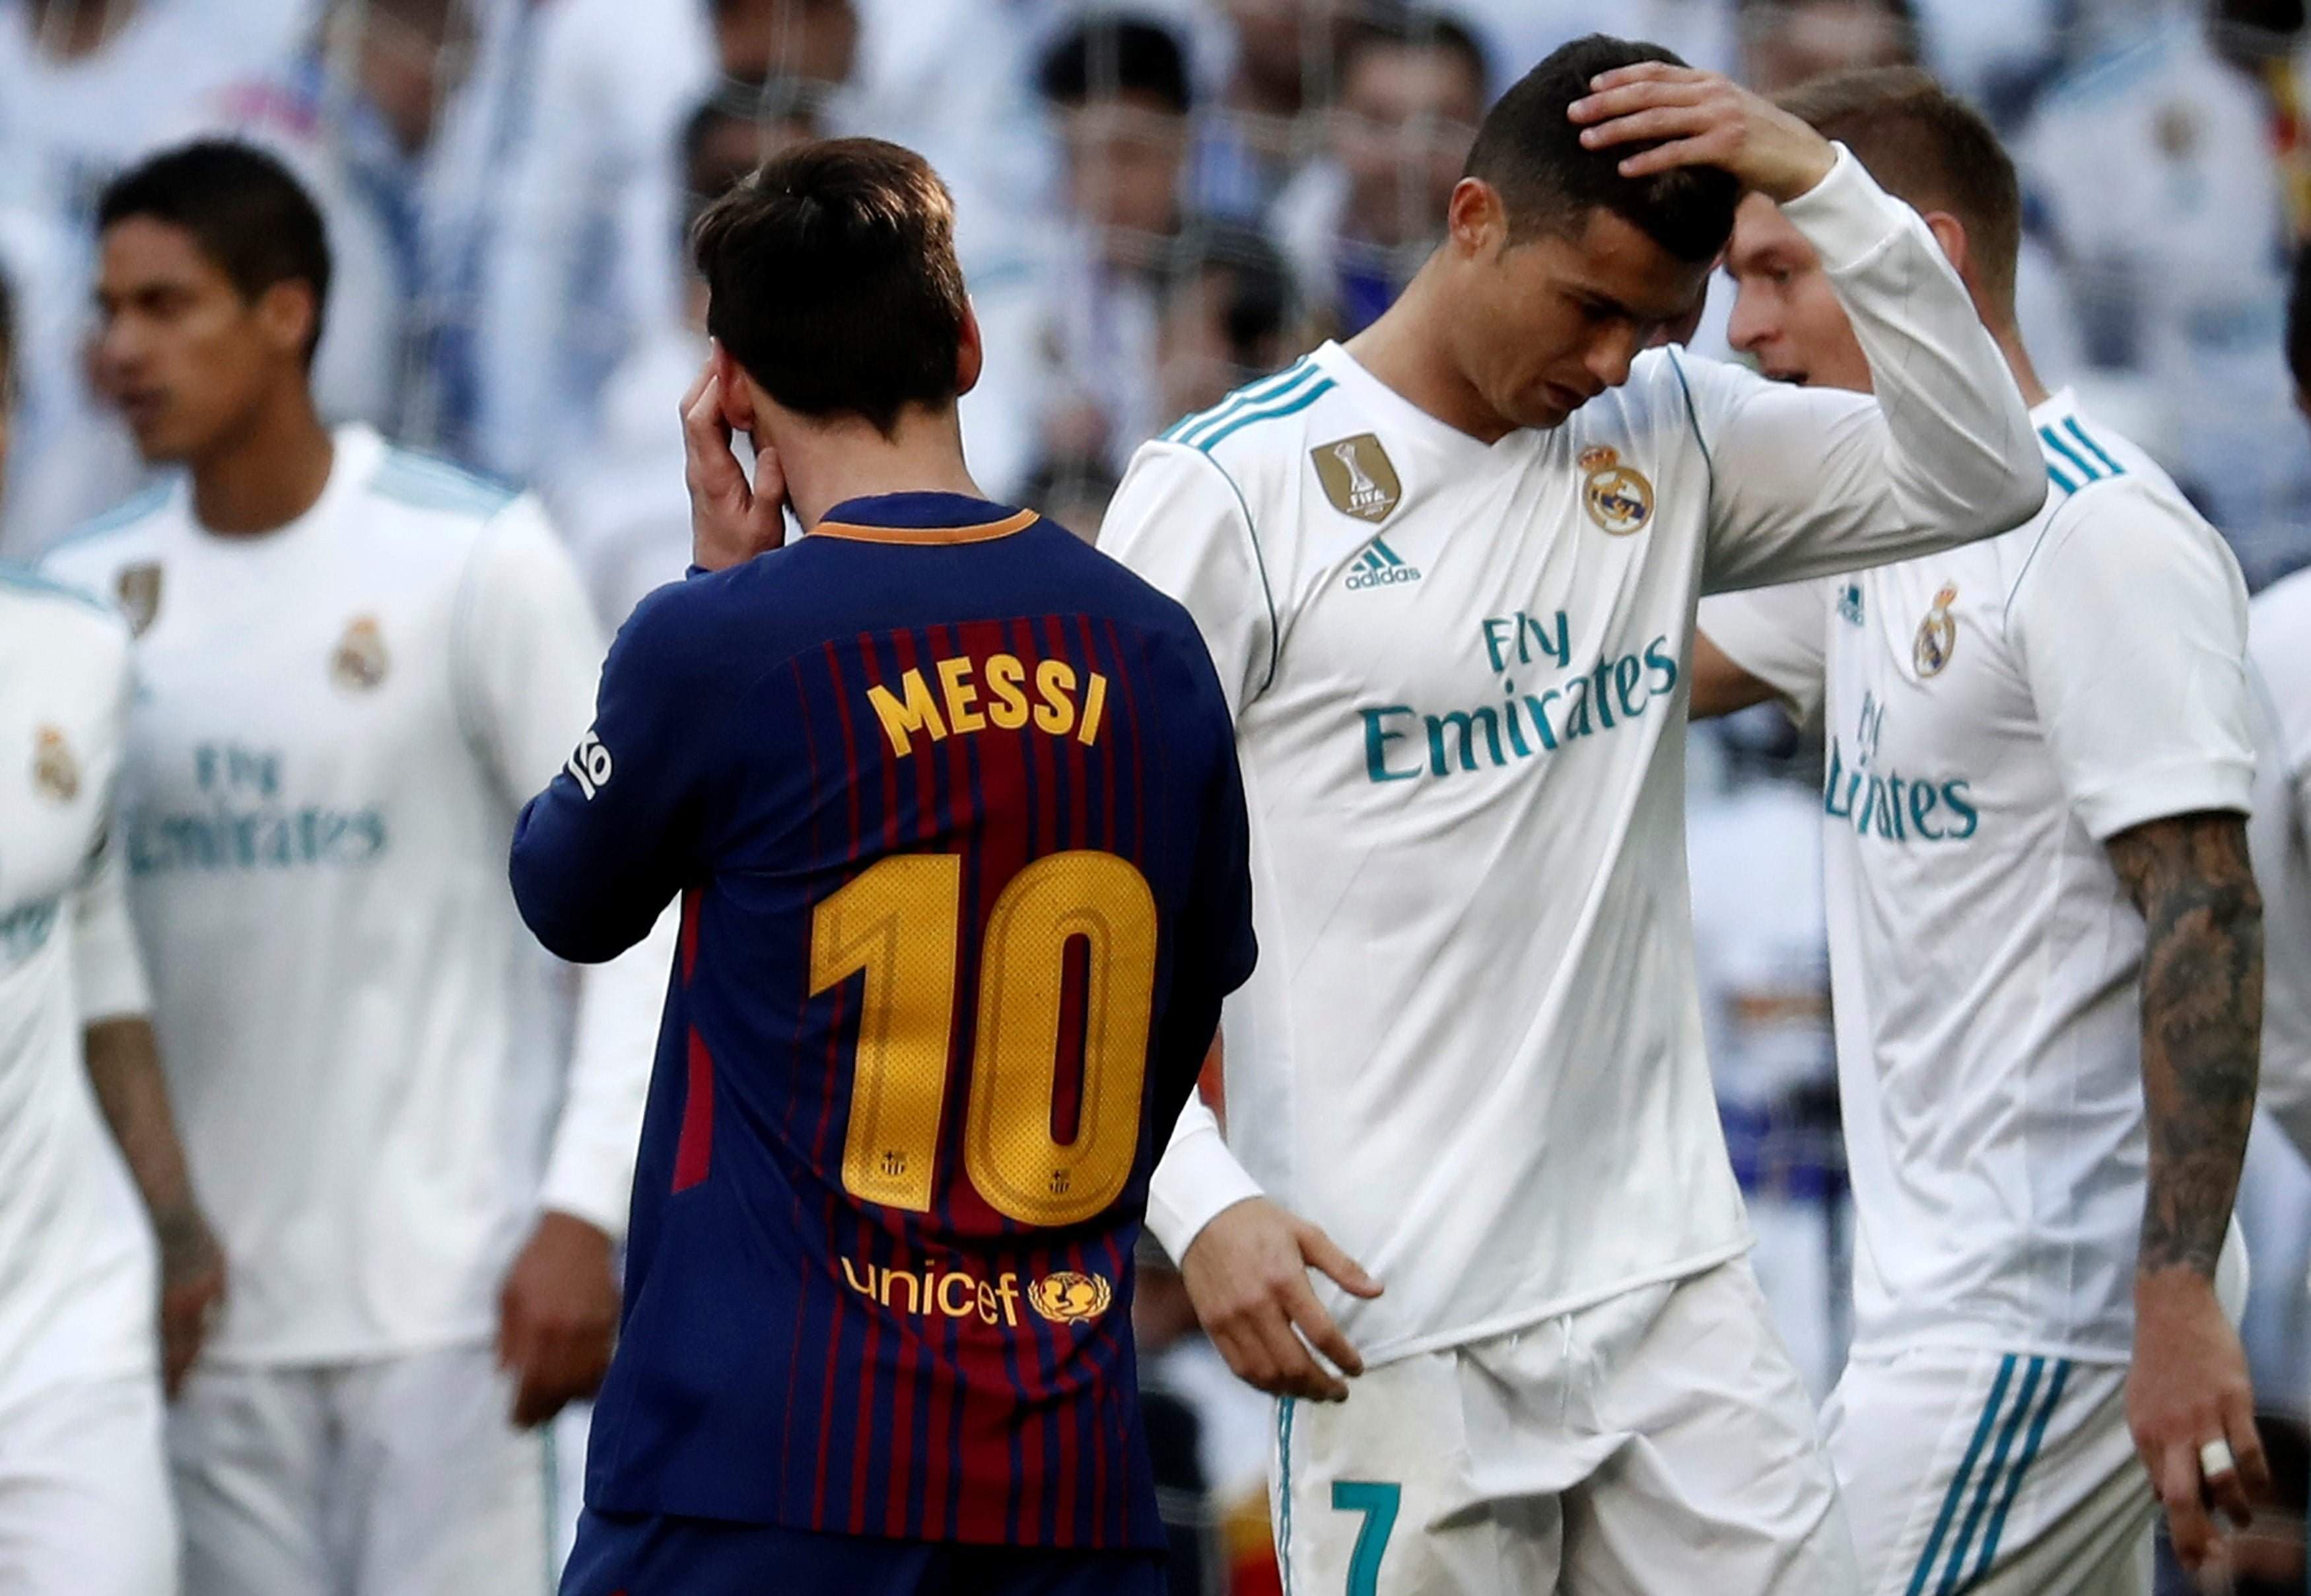 MADRID, SPAIN - DECEMBER 23: Cristiano Ronaldo (R) of Real Madrid and Lionel Messi (10) of Barcelona are seen during the La Liga match between Real Madrid and Barcelona at Santiago Bernabeu Stadium in Madrid, Spain on December 23, 2017. Burak Akbulut / Anadolu Agency FOT. ABACAPRESS.COM / NEWSPIX.PL POLAND ONLY !!! --- Newspix.pl *** Local Caption *** www.newspix.pl mail us: info@newspix.pl call us: 0048 022 23 22 222 --- Polish Picture Agency by Ringier Axel Springer Poland